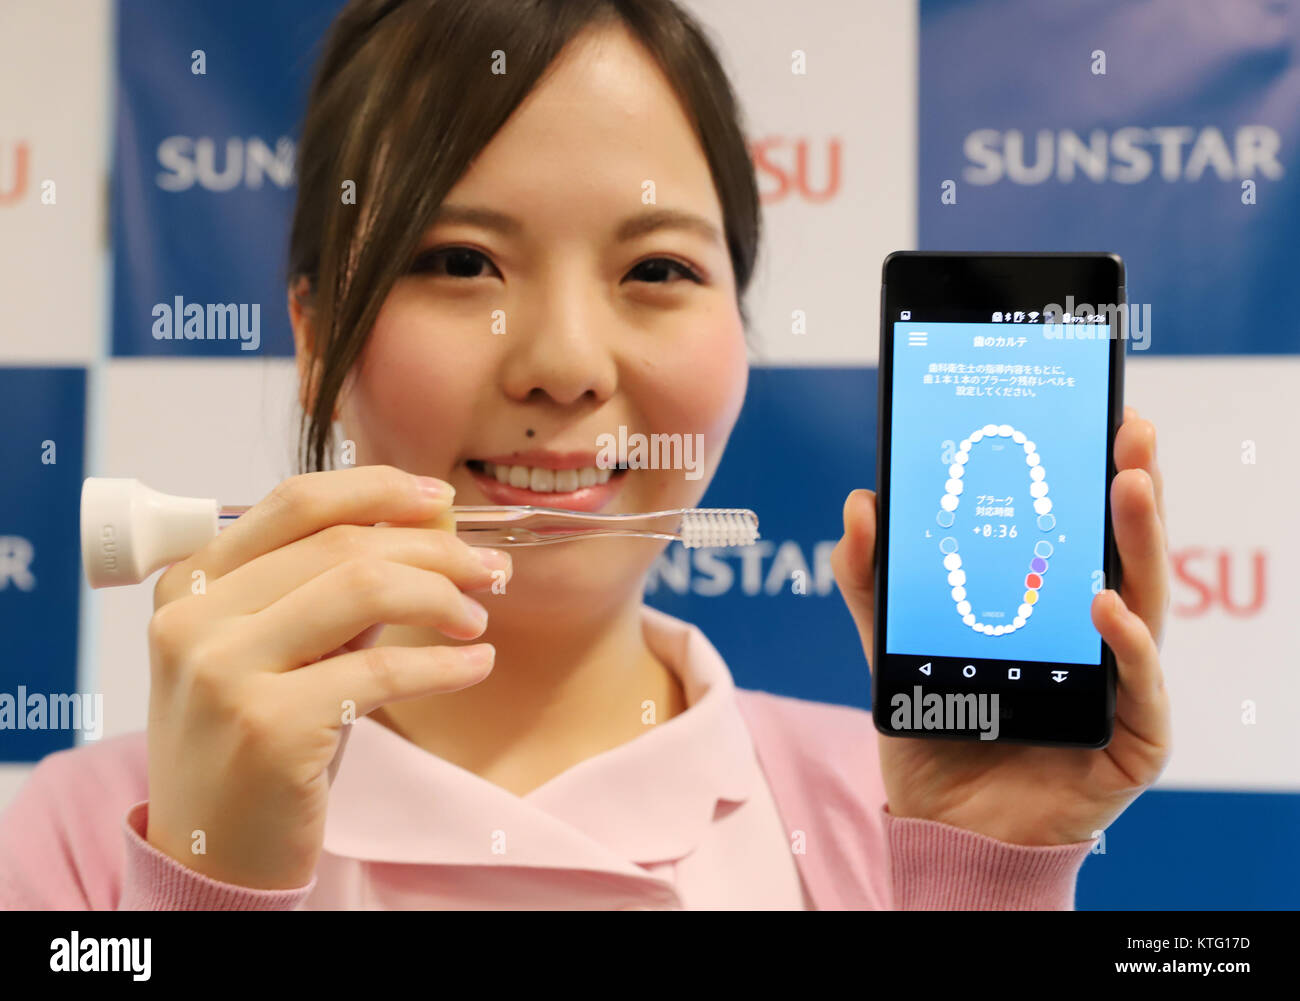 Tokyo, Japan. 25th Dec, 2017. A dental hygienist displays Japanese oral care company Sunstar's smart toothbrush 'GUM PLAY' as the company and Japanese computer giant Fujitsu announced the new service for dentist using the smart toothbrush and cloud computing technology at Fujitsu's headquarters in Tokyo on Monday, December 25, 2017. The GUM Play toothbrush has sensors and which enables to check mouth condition and to advise effective brushing ways with a smart phone. Credit: Yoshio Tsunoda/AFLO/Alamy Live News Stock Photo